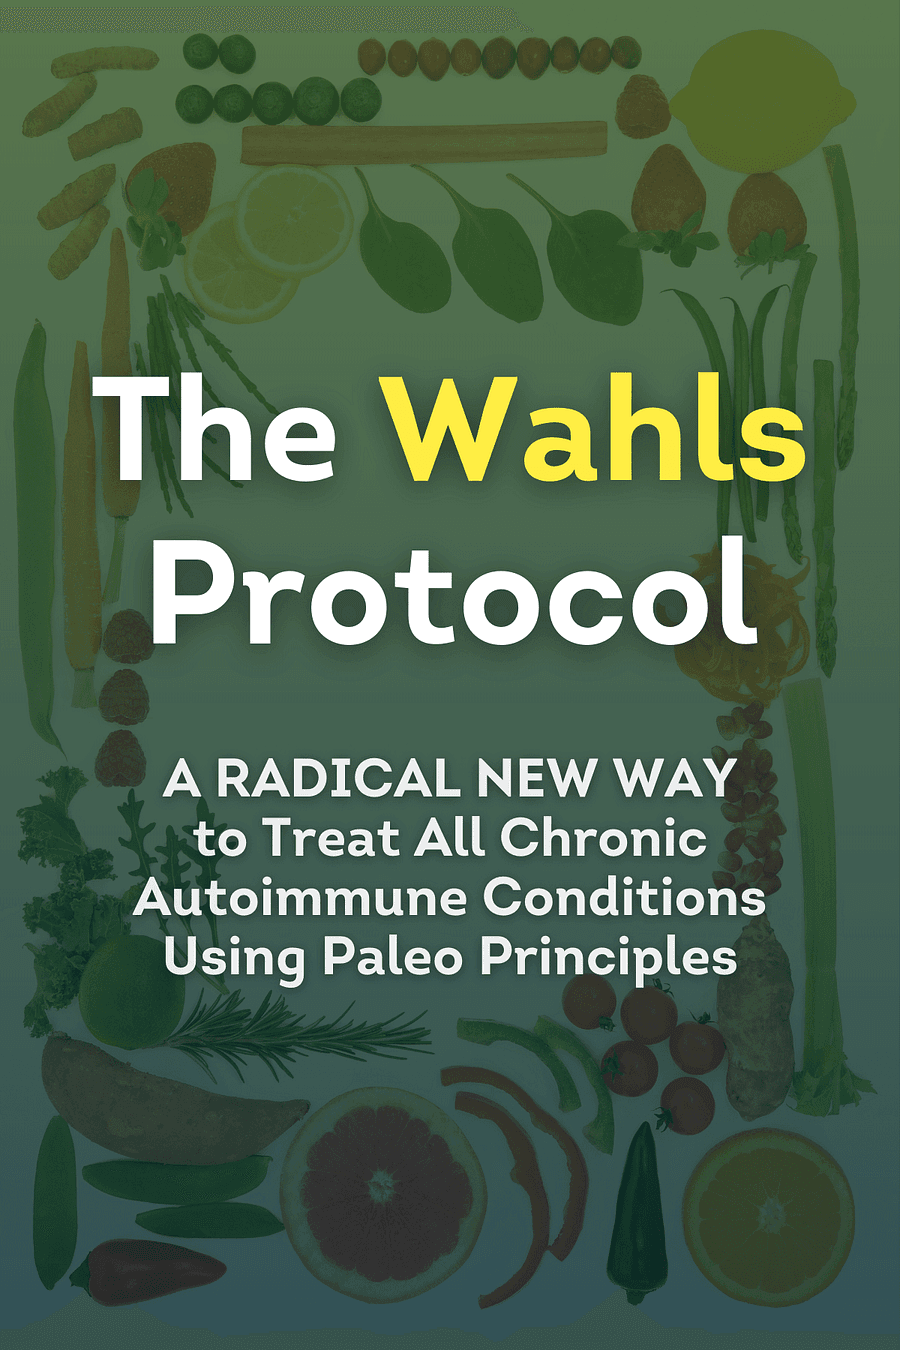 The Wahls Protocol by Dr. Terry Wahls MD, Eve Adamson - Book Summary